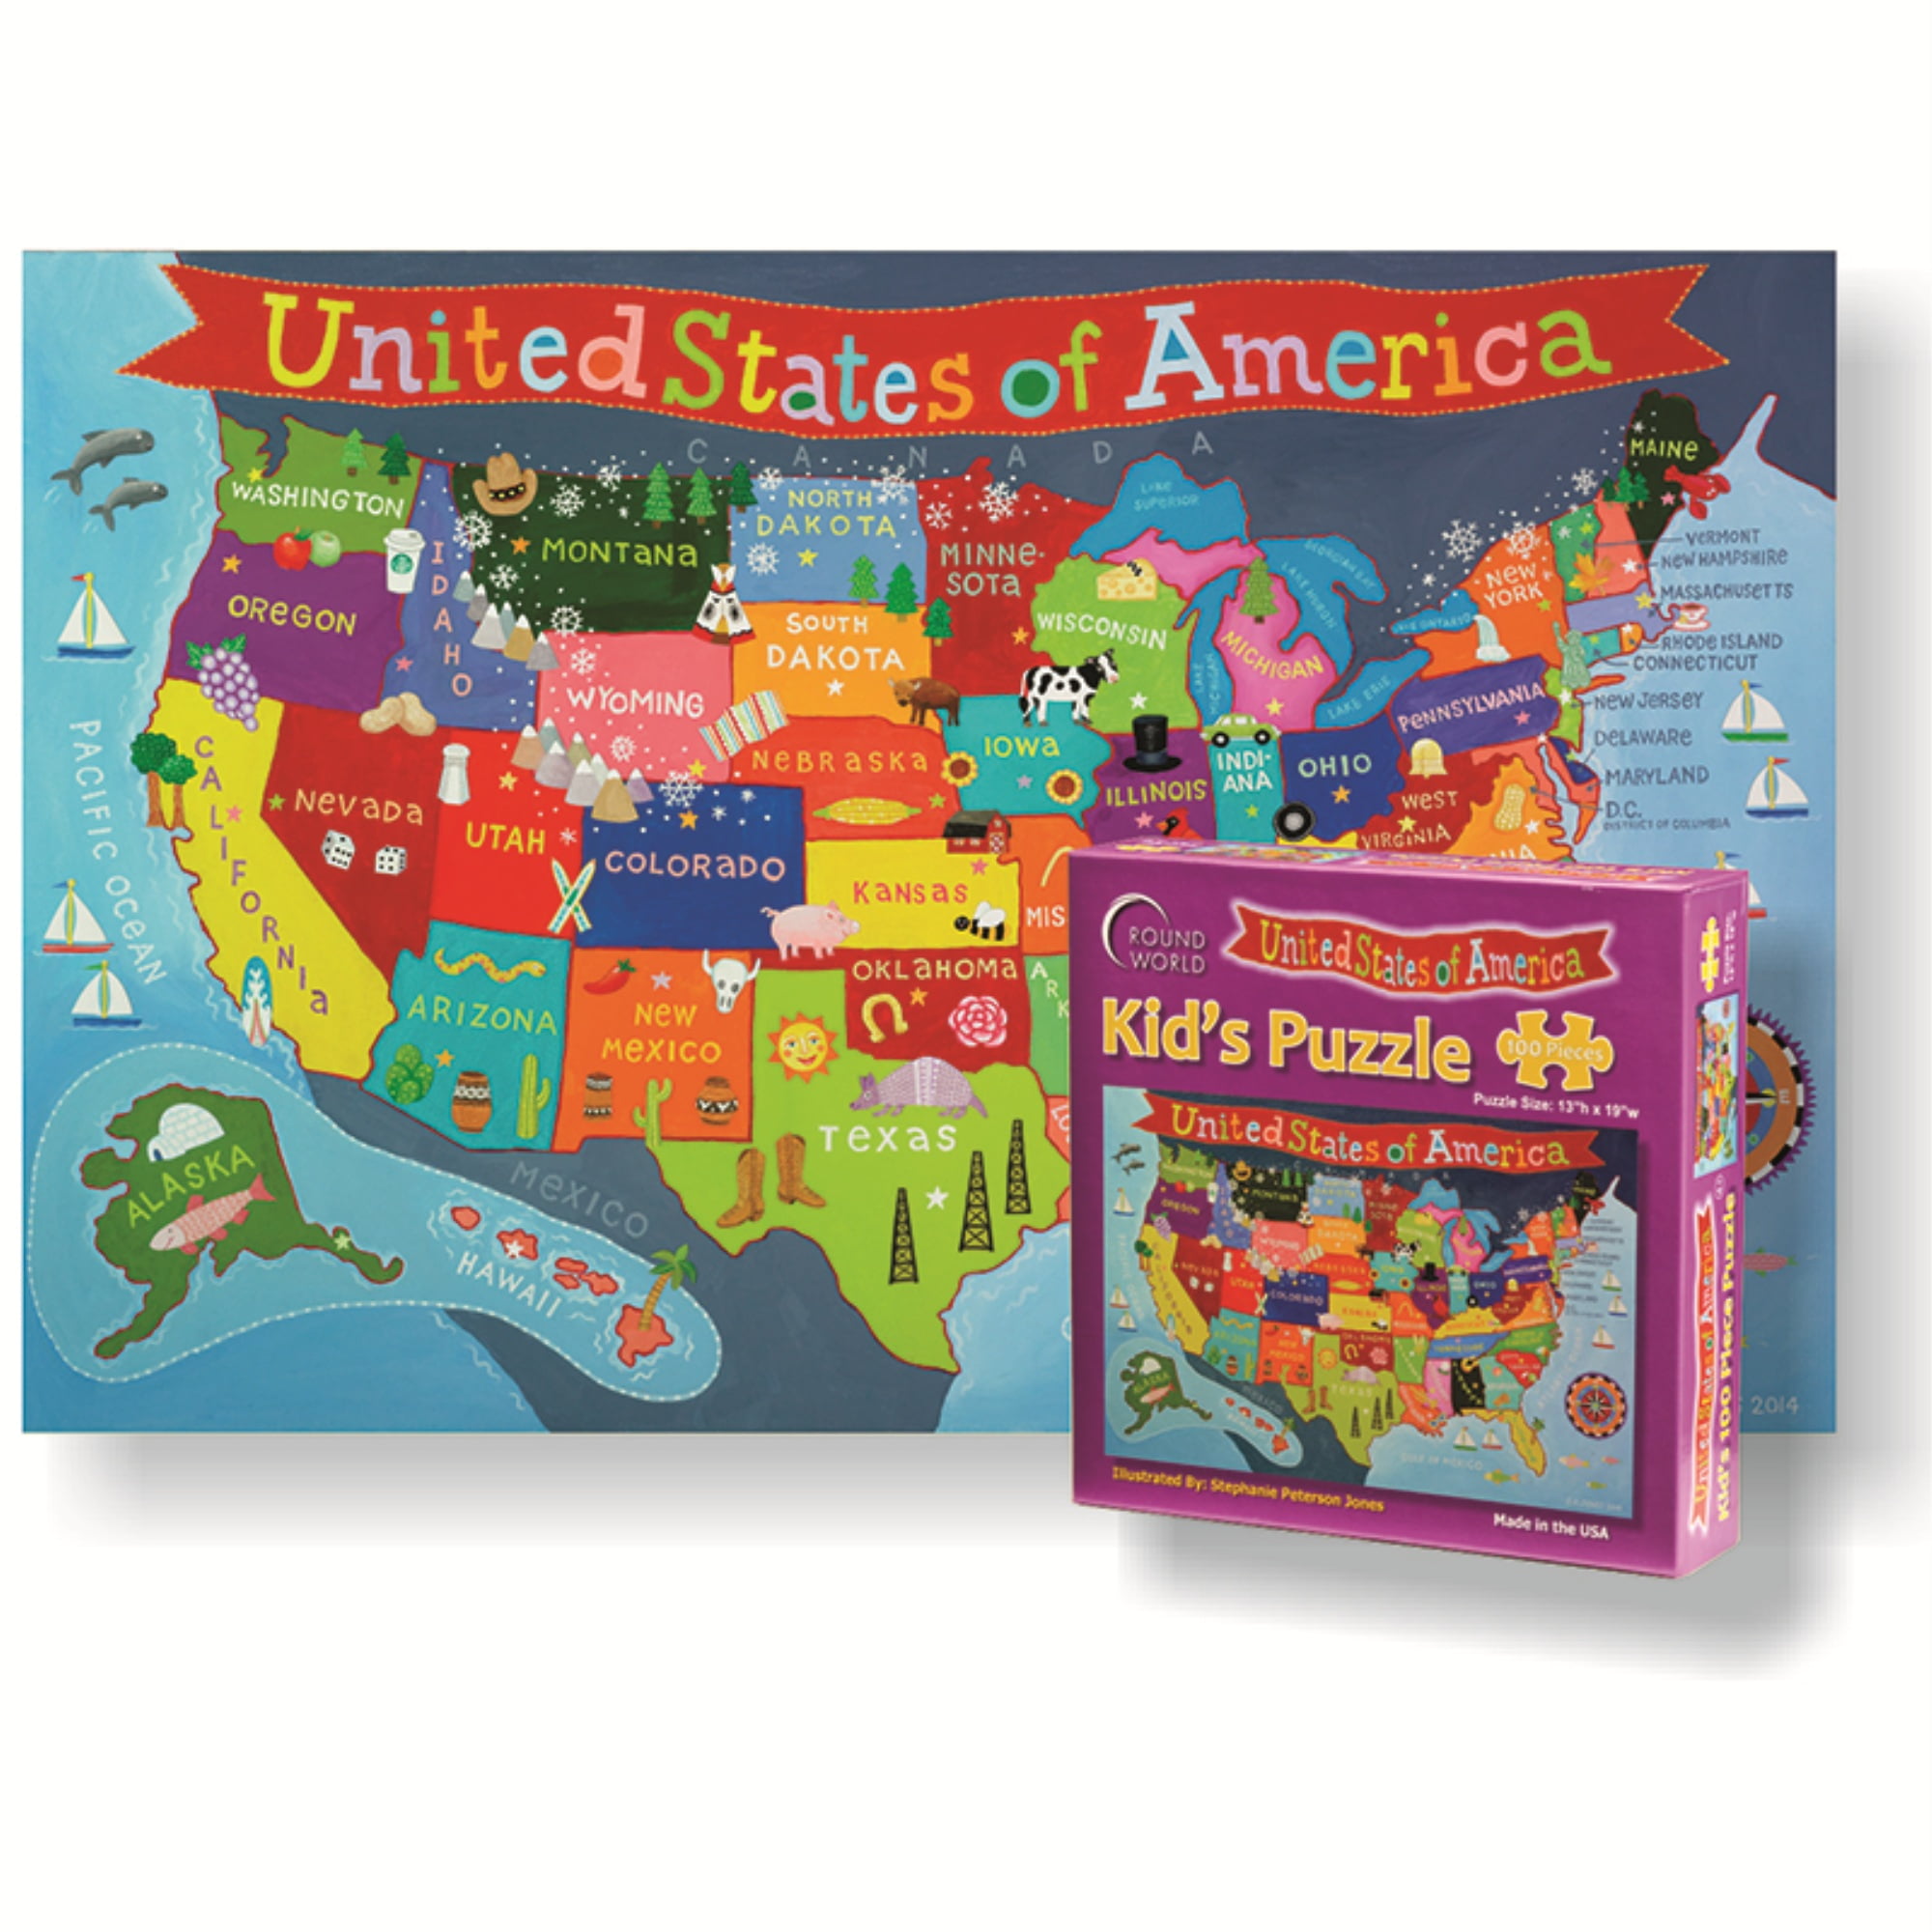 Professor Poplar's Fifty Nifty United States USA Map Wooden Jigsaw Puzzle for sale online 